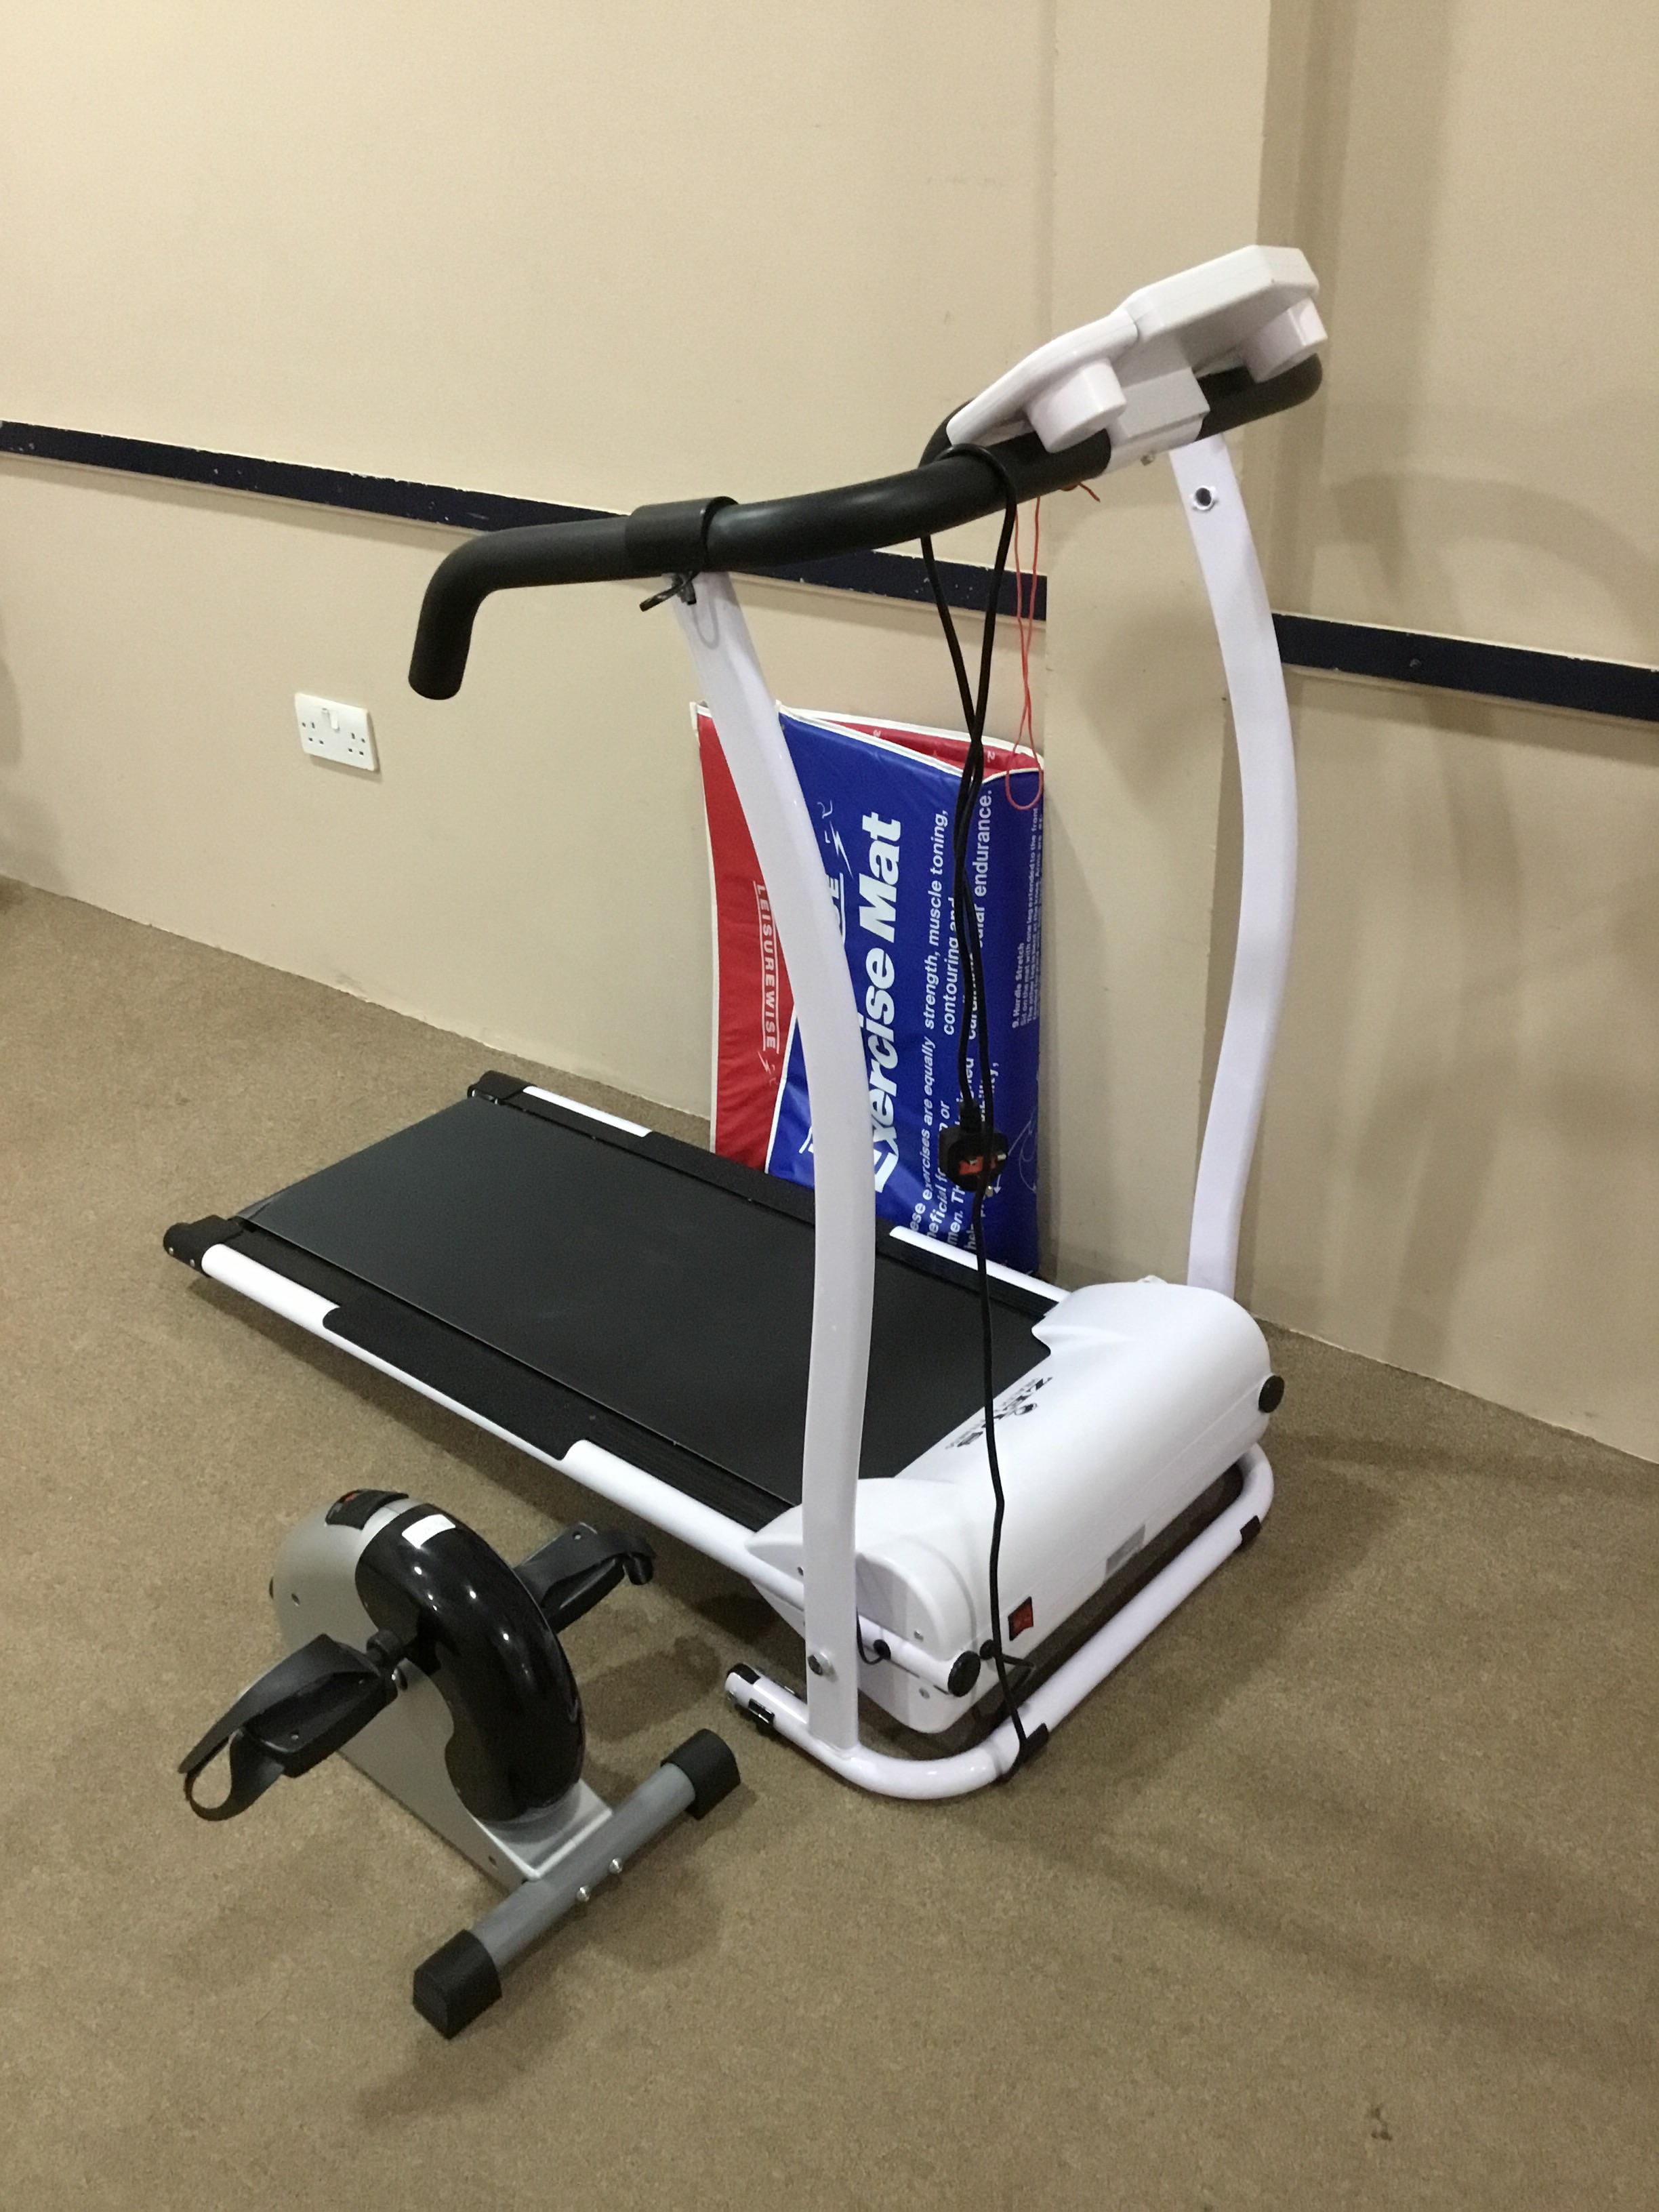 A ZEUS HEALTH & FITNESS TREADMILL AND A PEDAL MACHINE